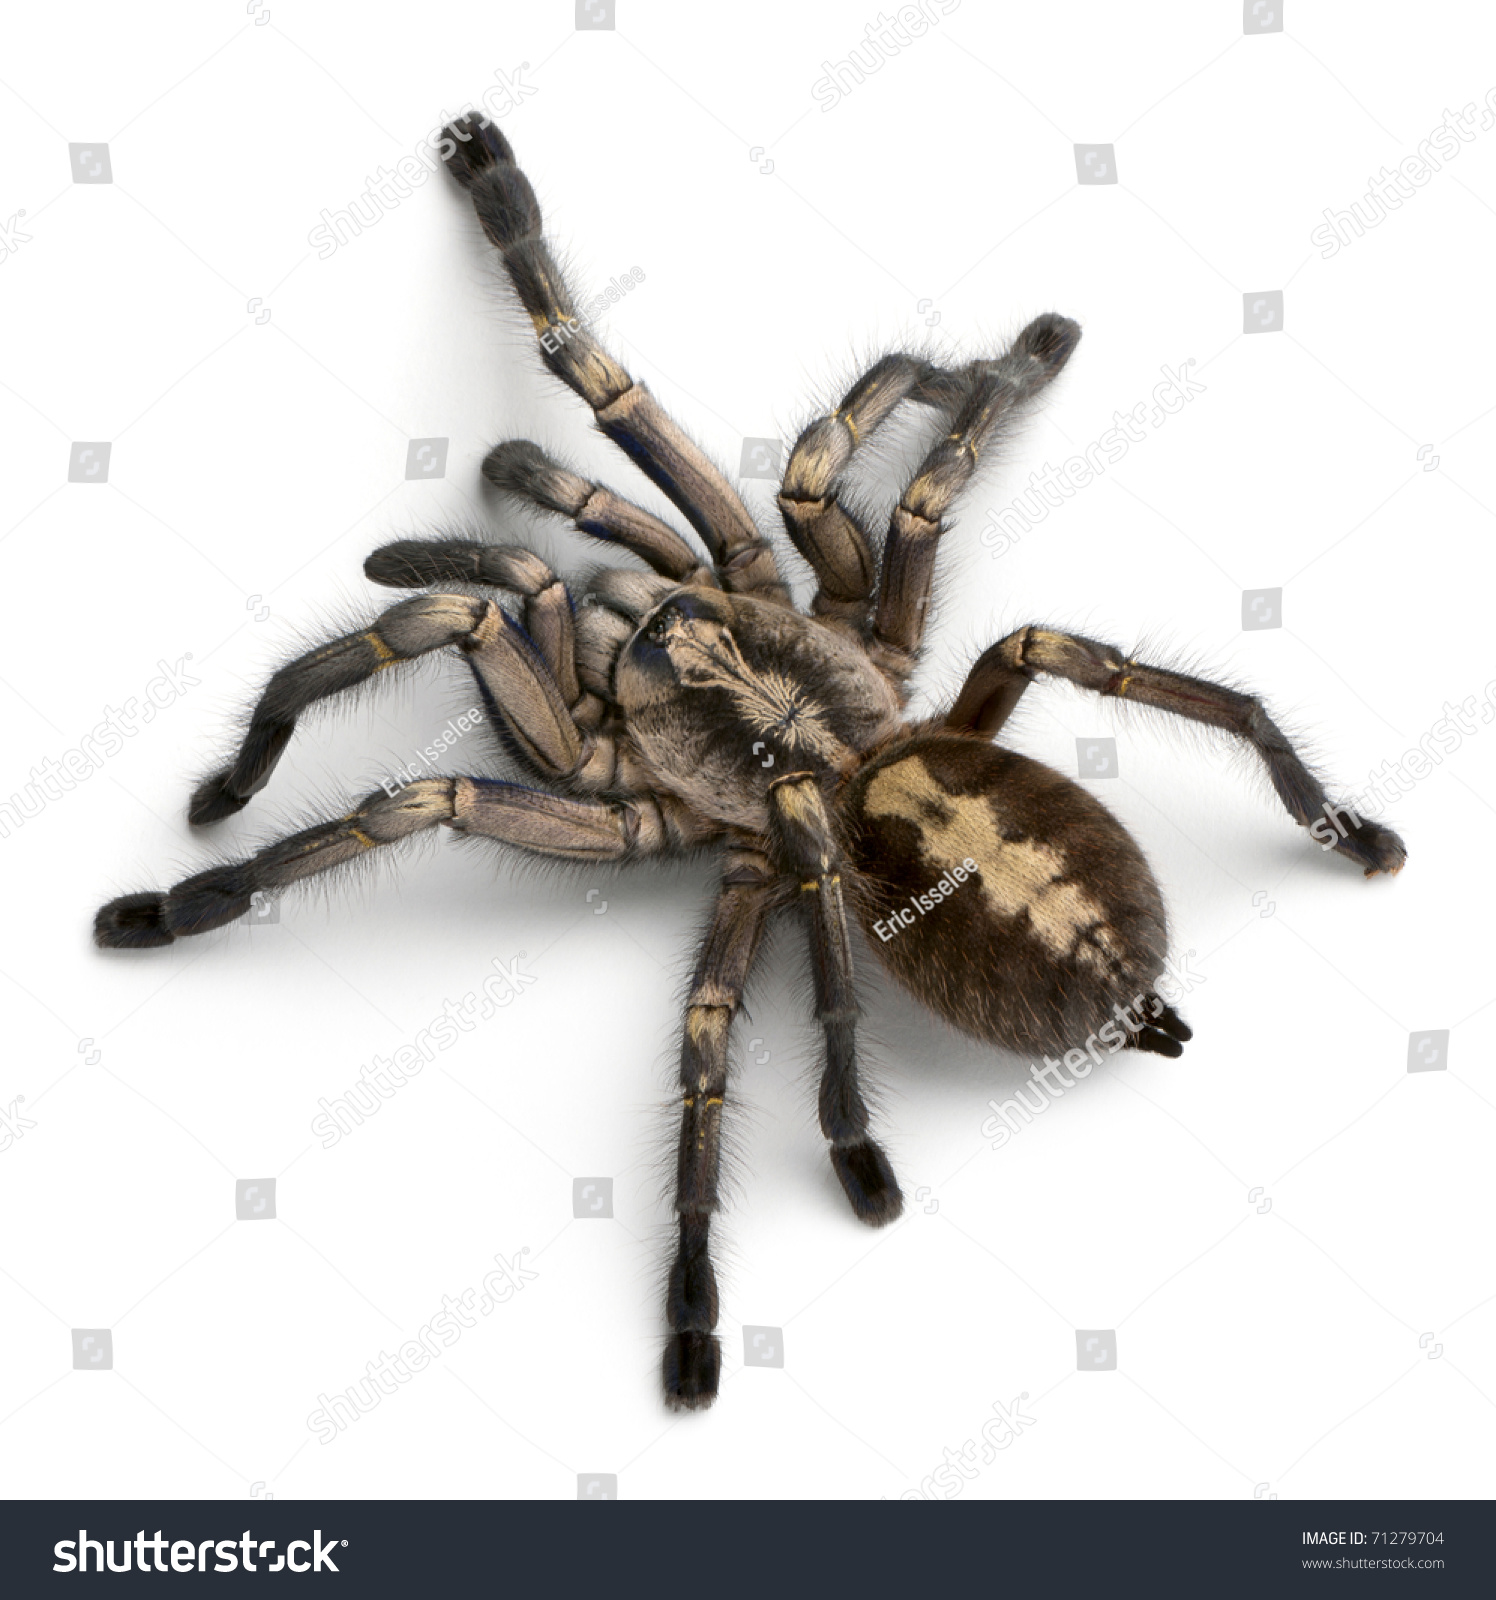 Tarantula spider, Poecilotheria Metallica, in front of white background #71279704